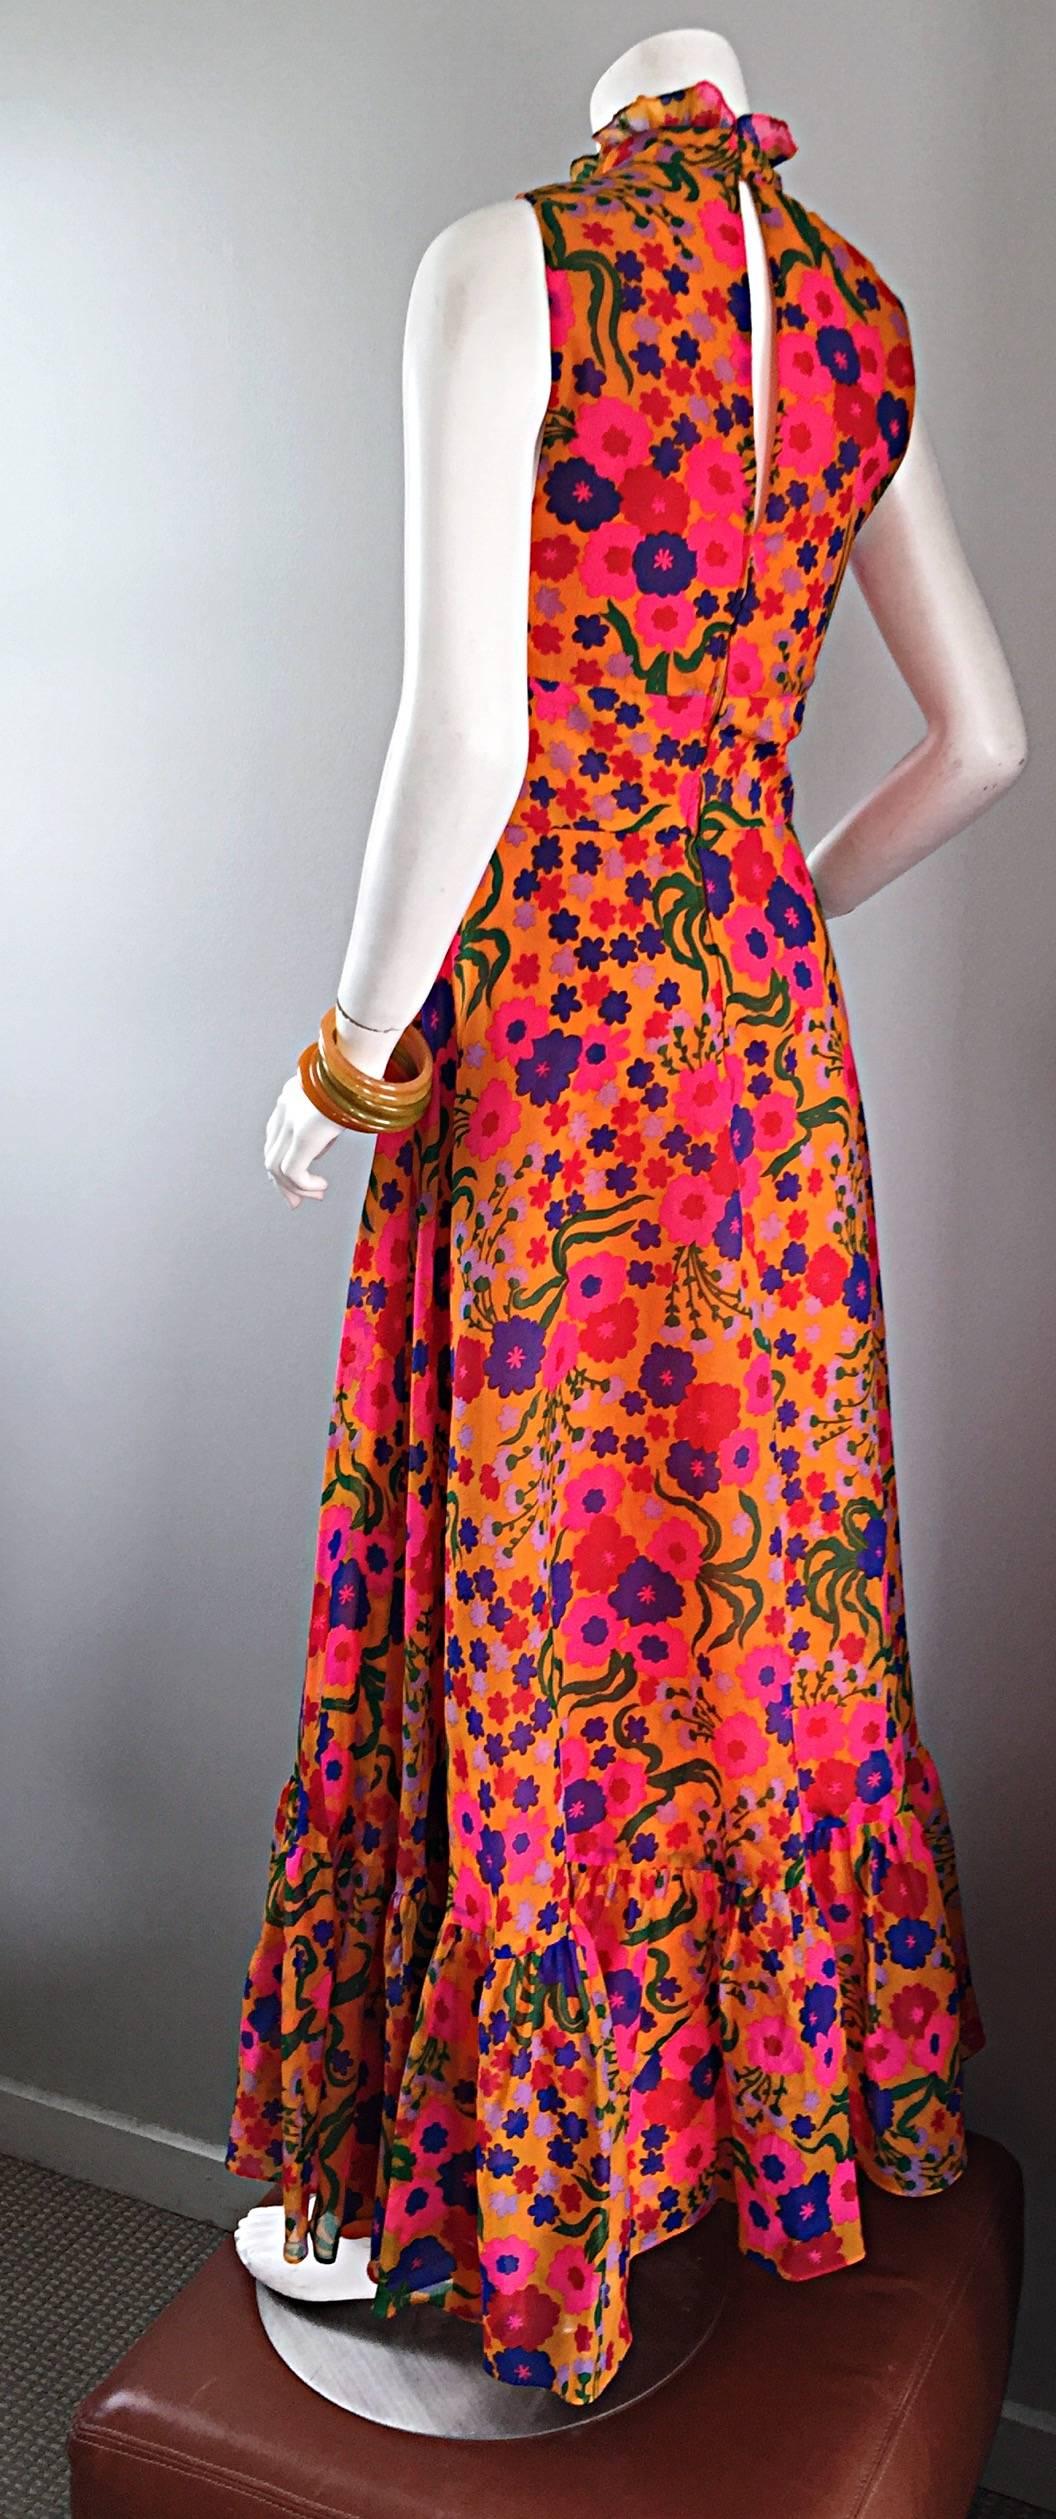 Women's Amazing 1970s 70s Colorful Psychedelic Chiffon Floral Ruffle Vintage Maxi Dress